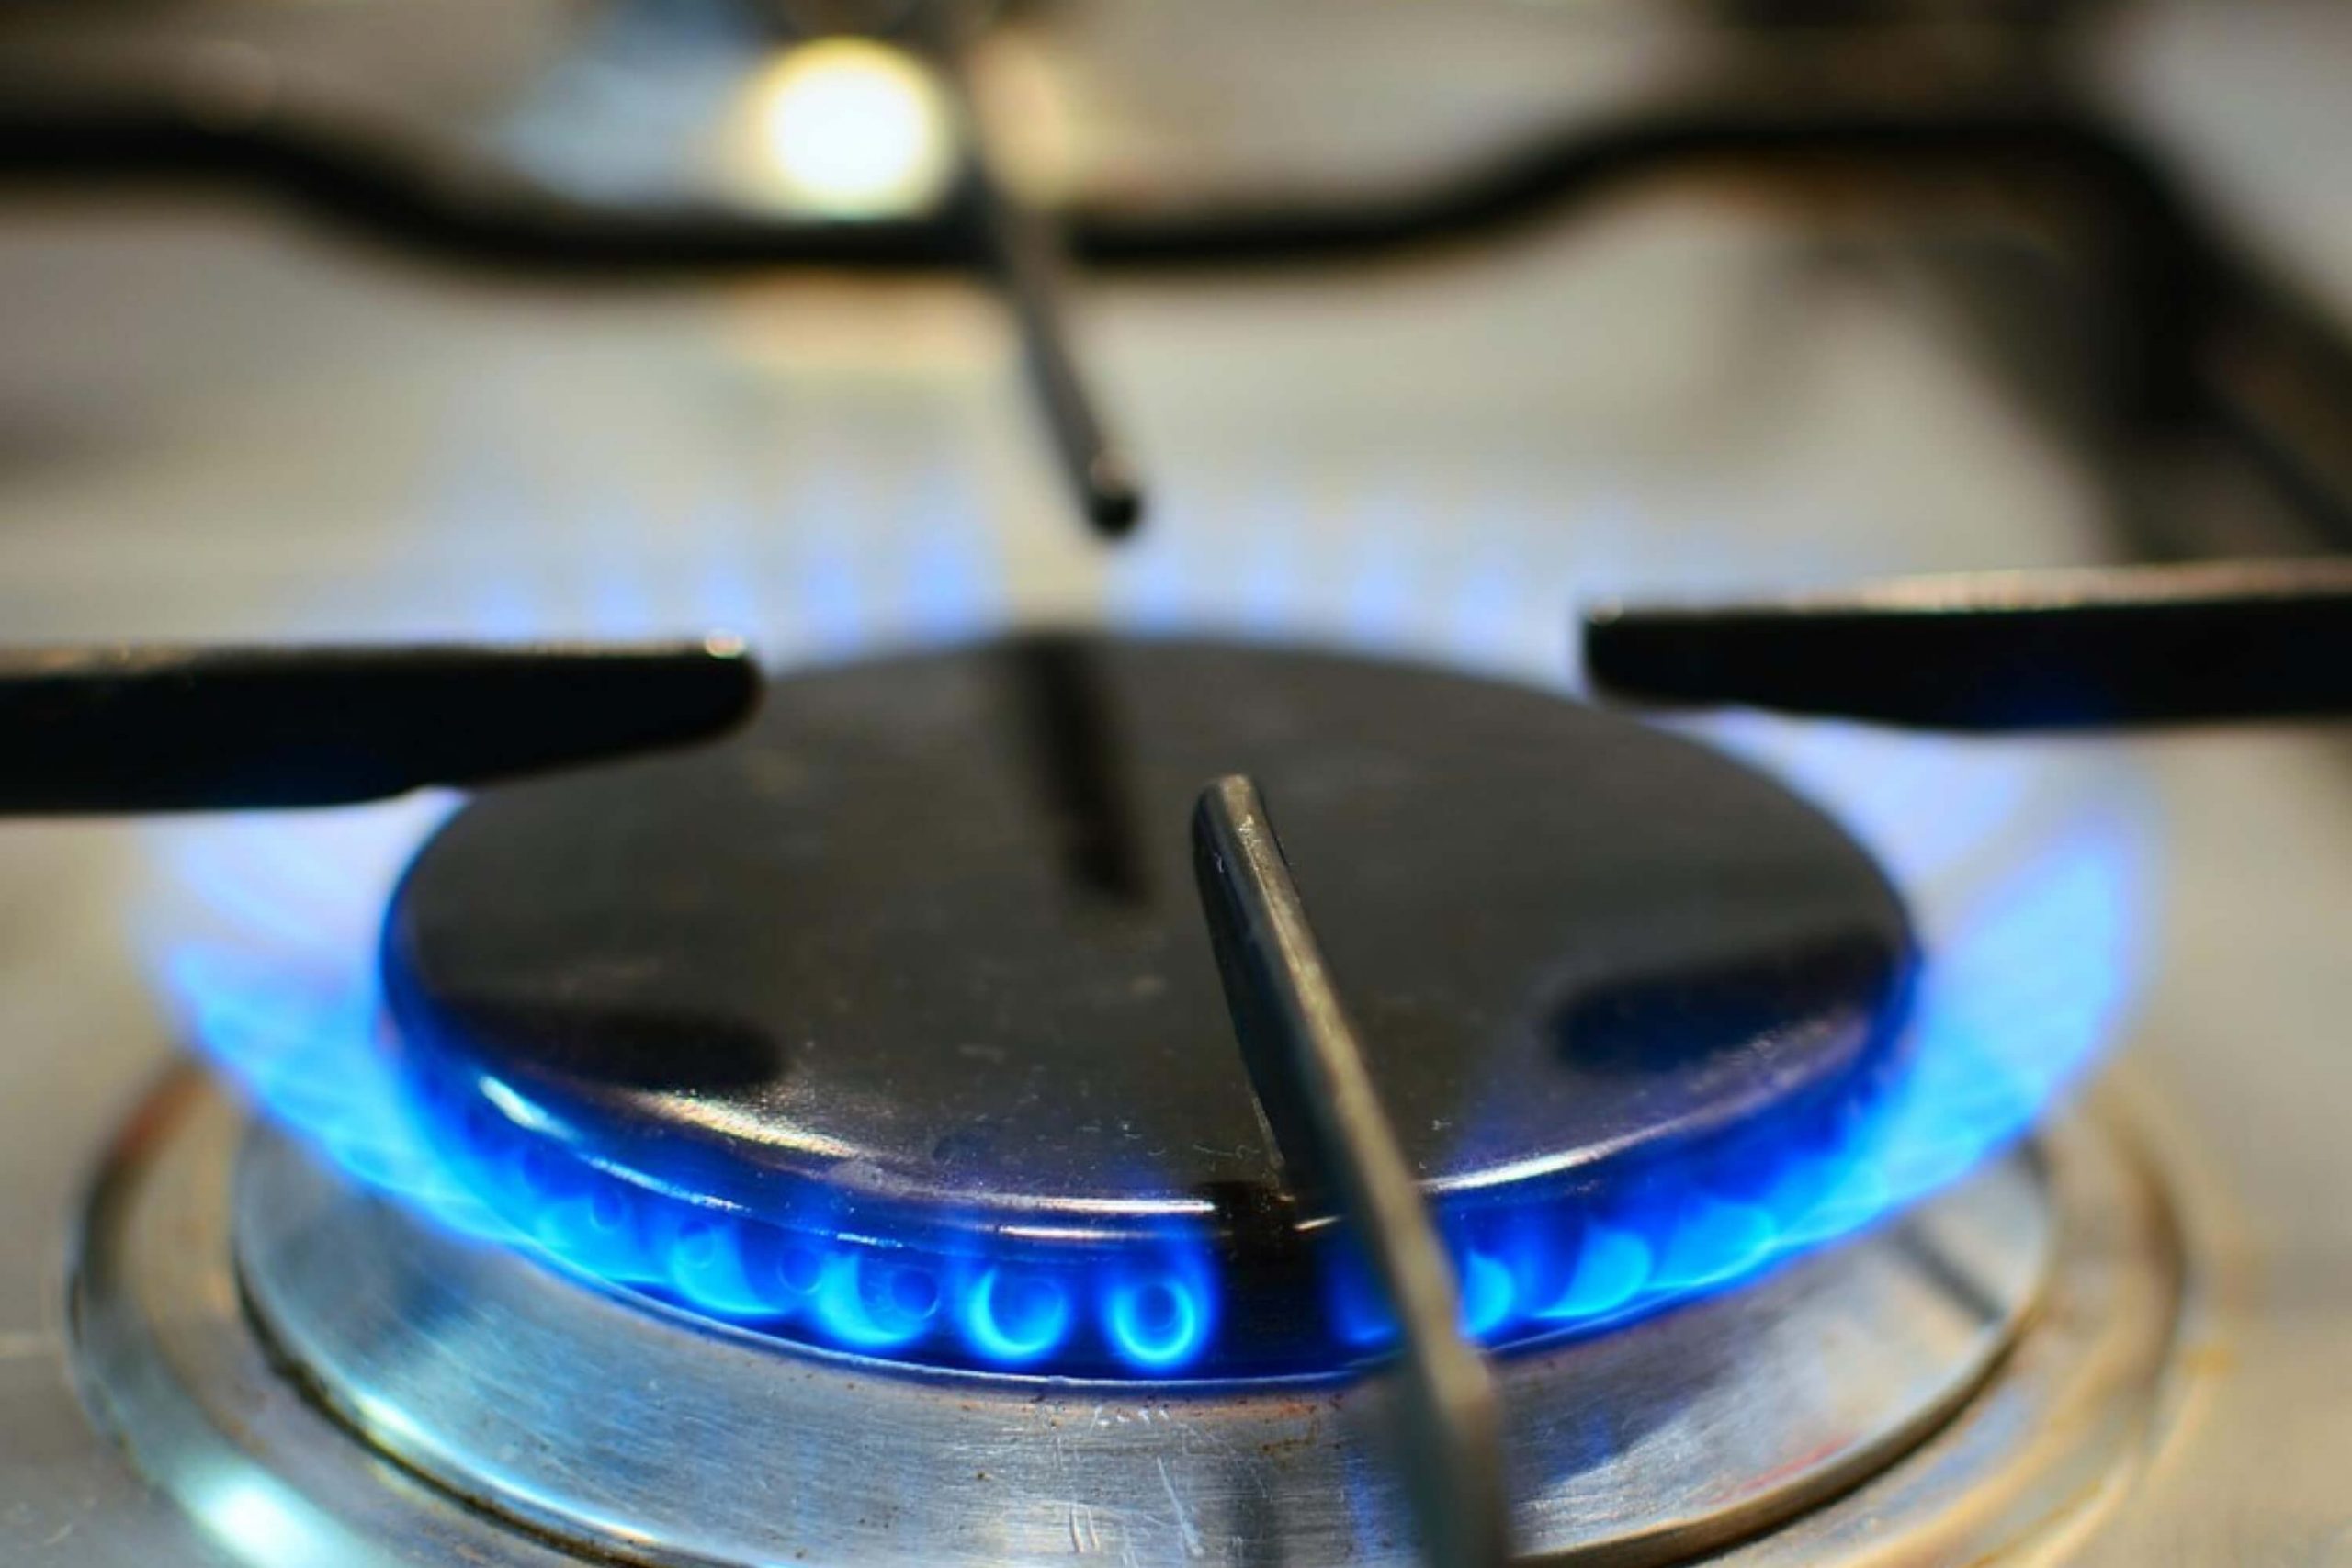 How Gas Smell From the Stove In Your House Can Harm You